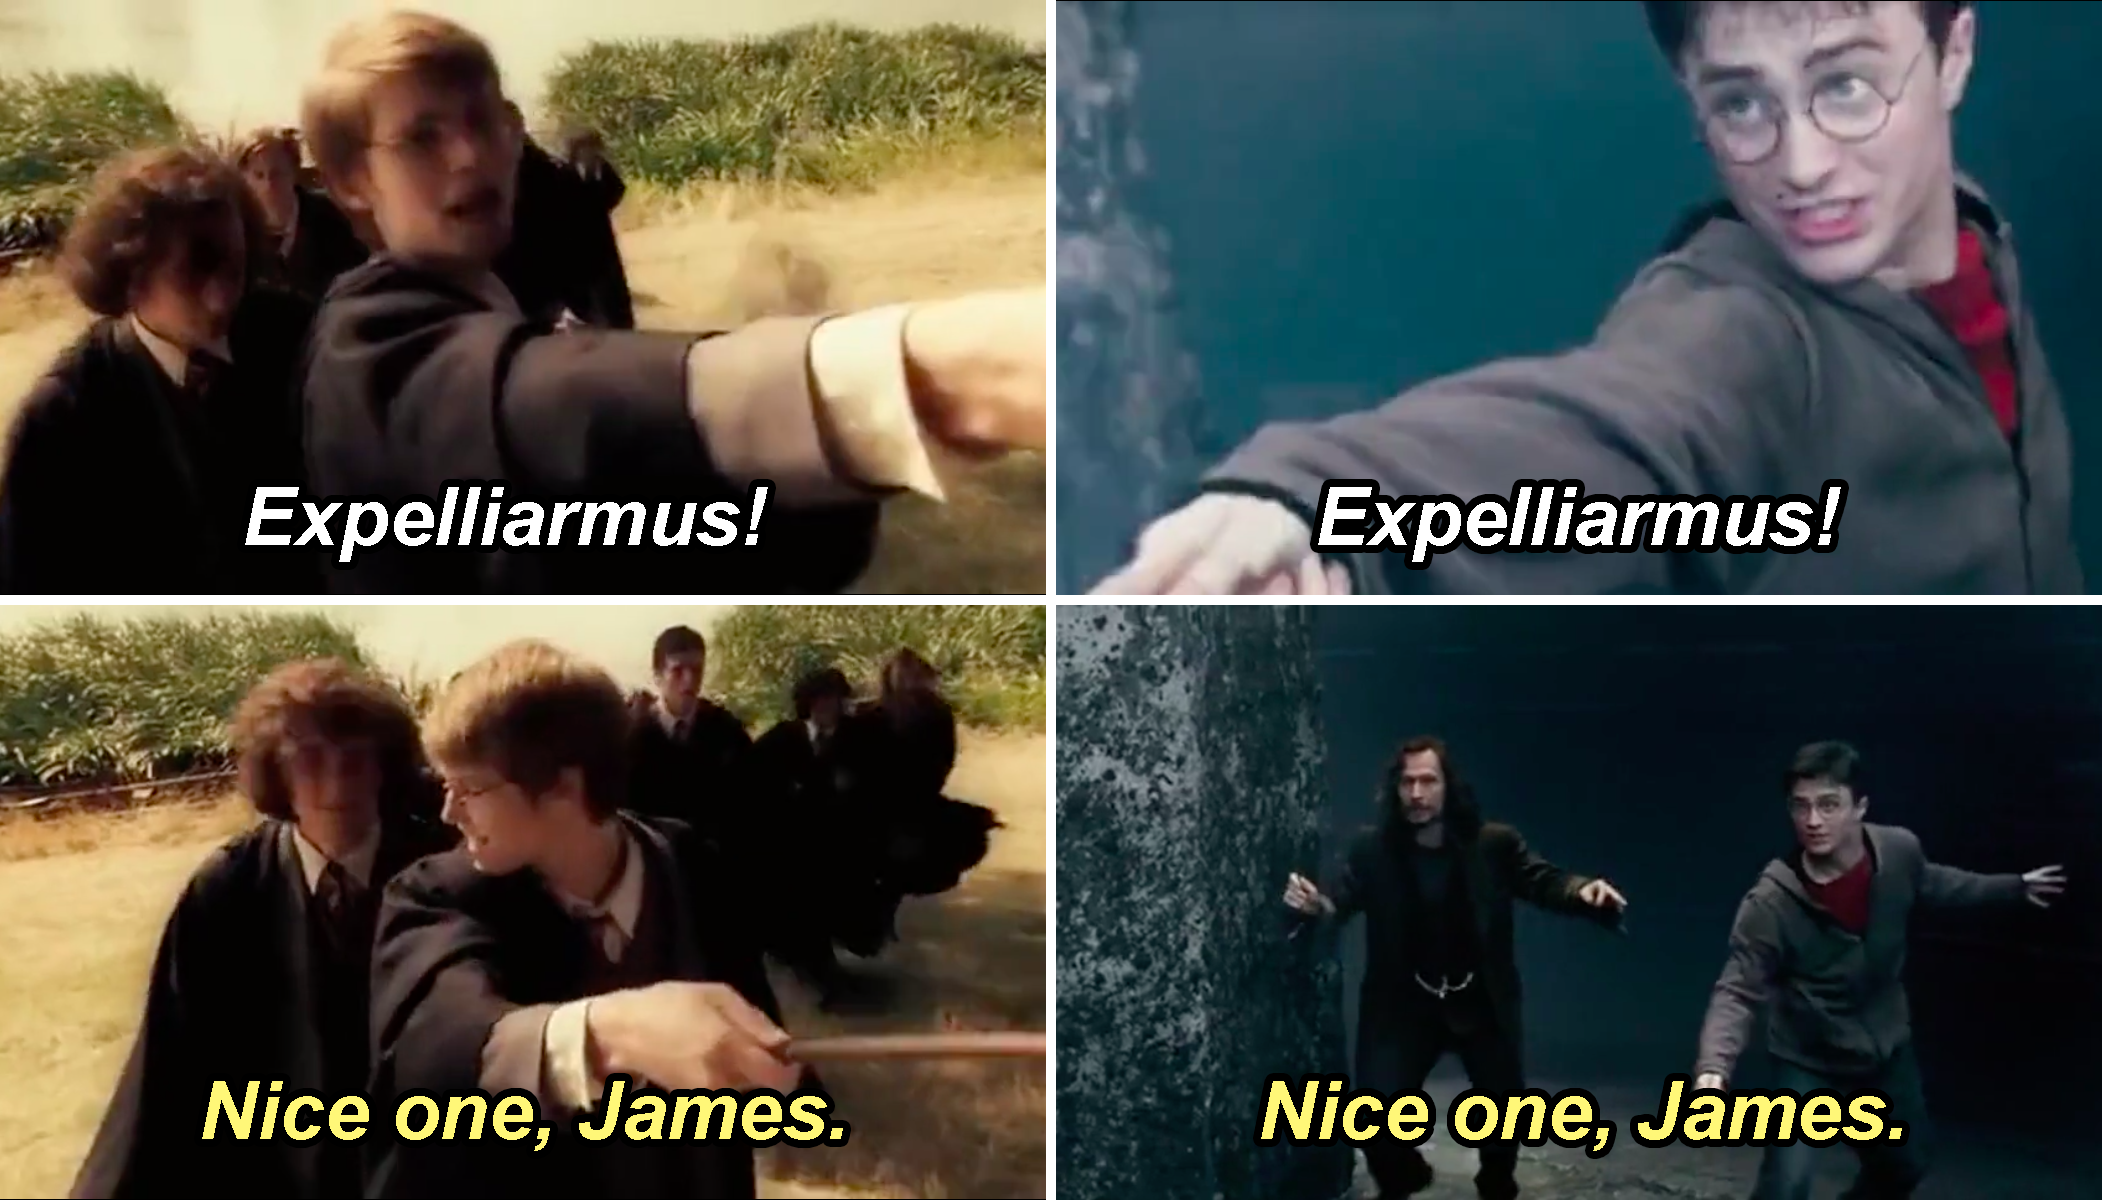 James and Harry using &quot;Expelliarmus&quot; and Sirius responding in both with &quot;Nice one, James&quot;